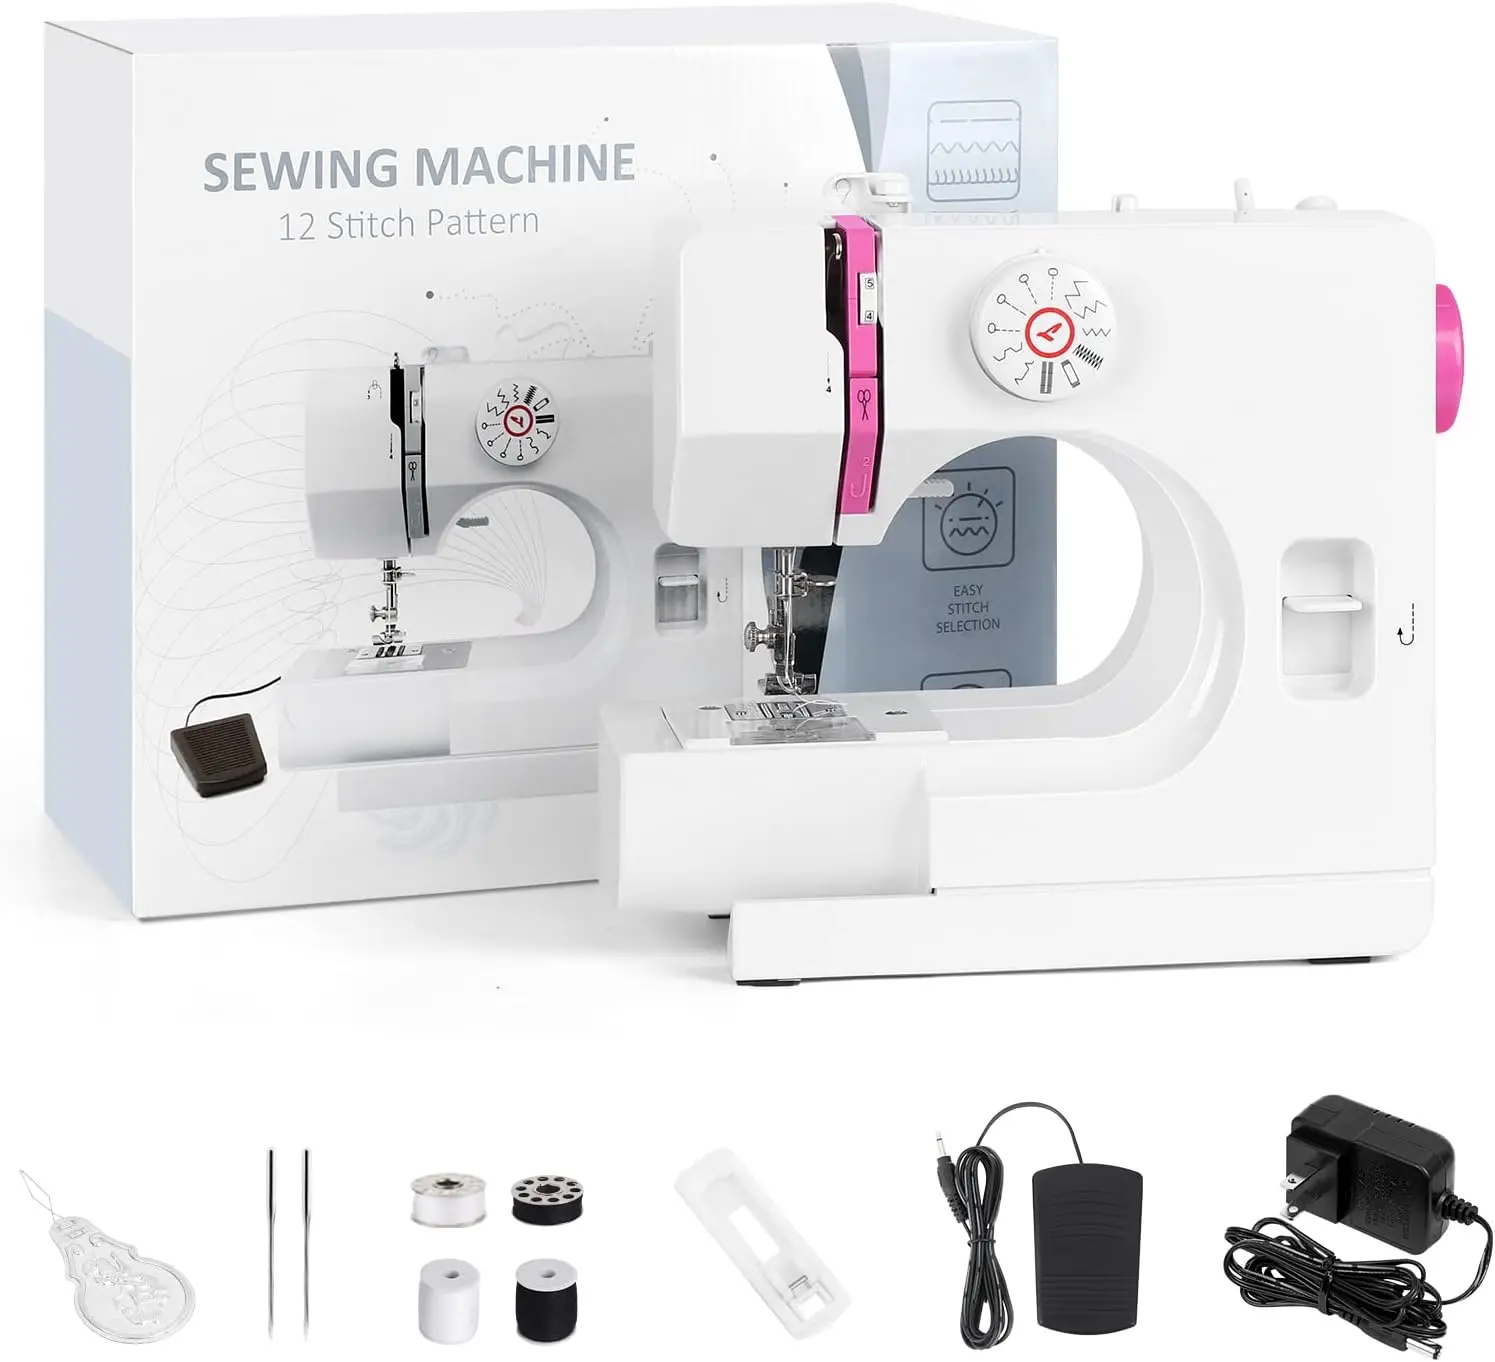 

Multifunction Household Sewing Machine,Portable DIY-Hand Crafting Mending Sewing Machine with 12 Stitches for Beginners